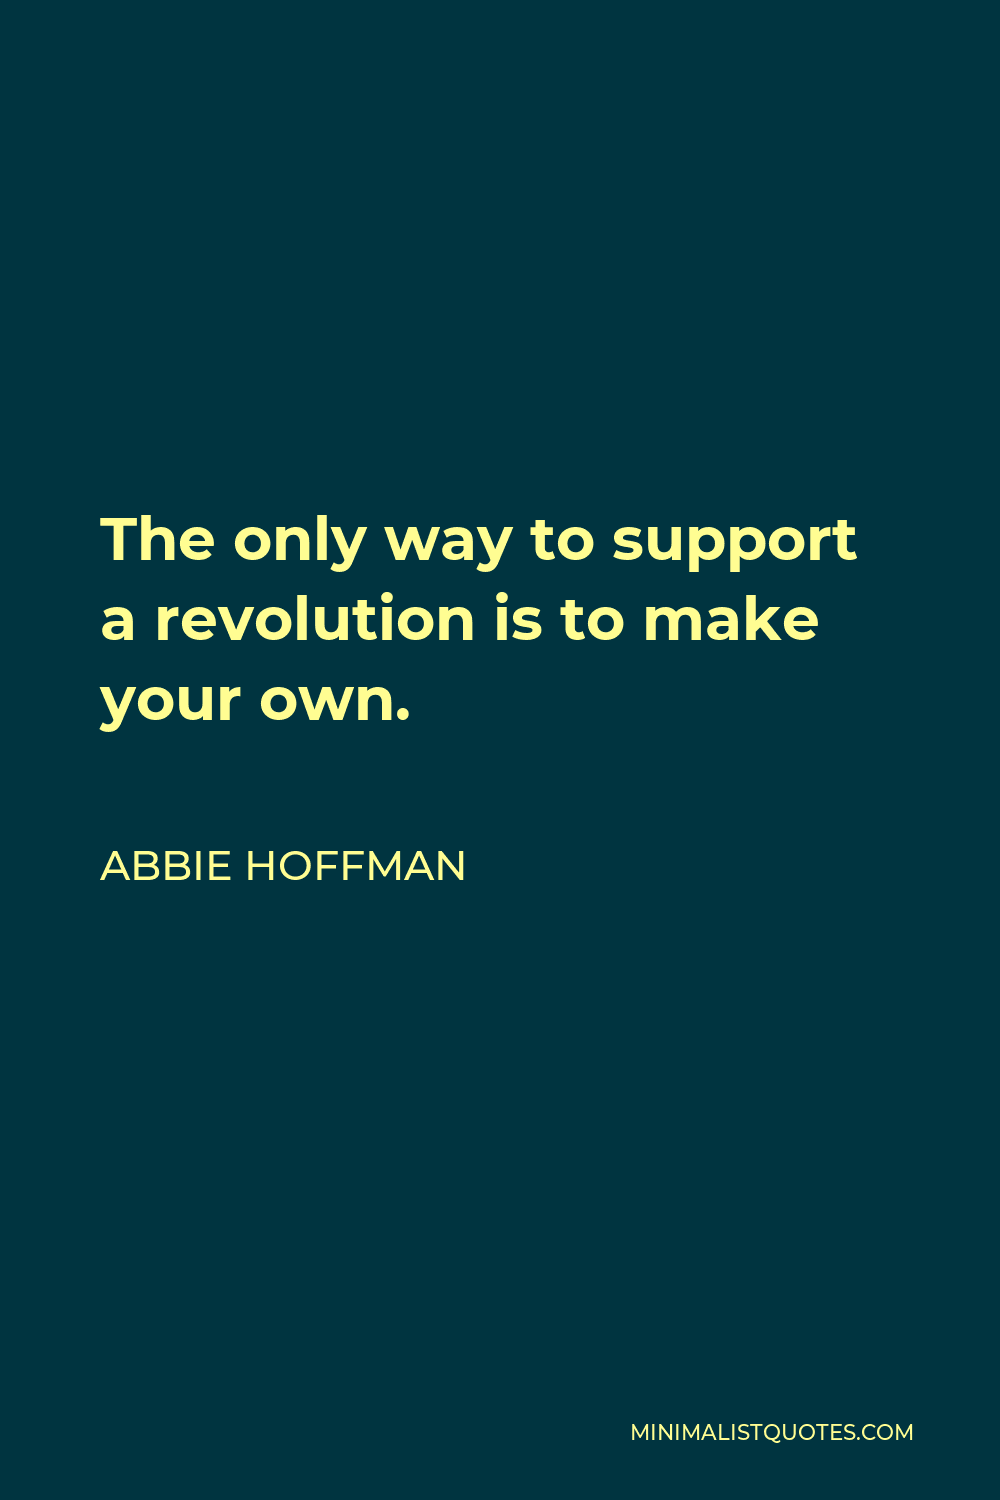 Abbie Hoffman Quote - The only way to support a revolution is to make your own.